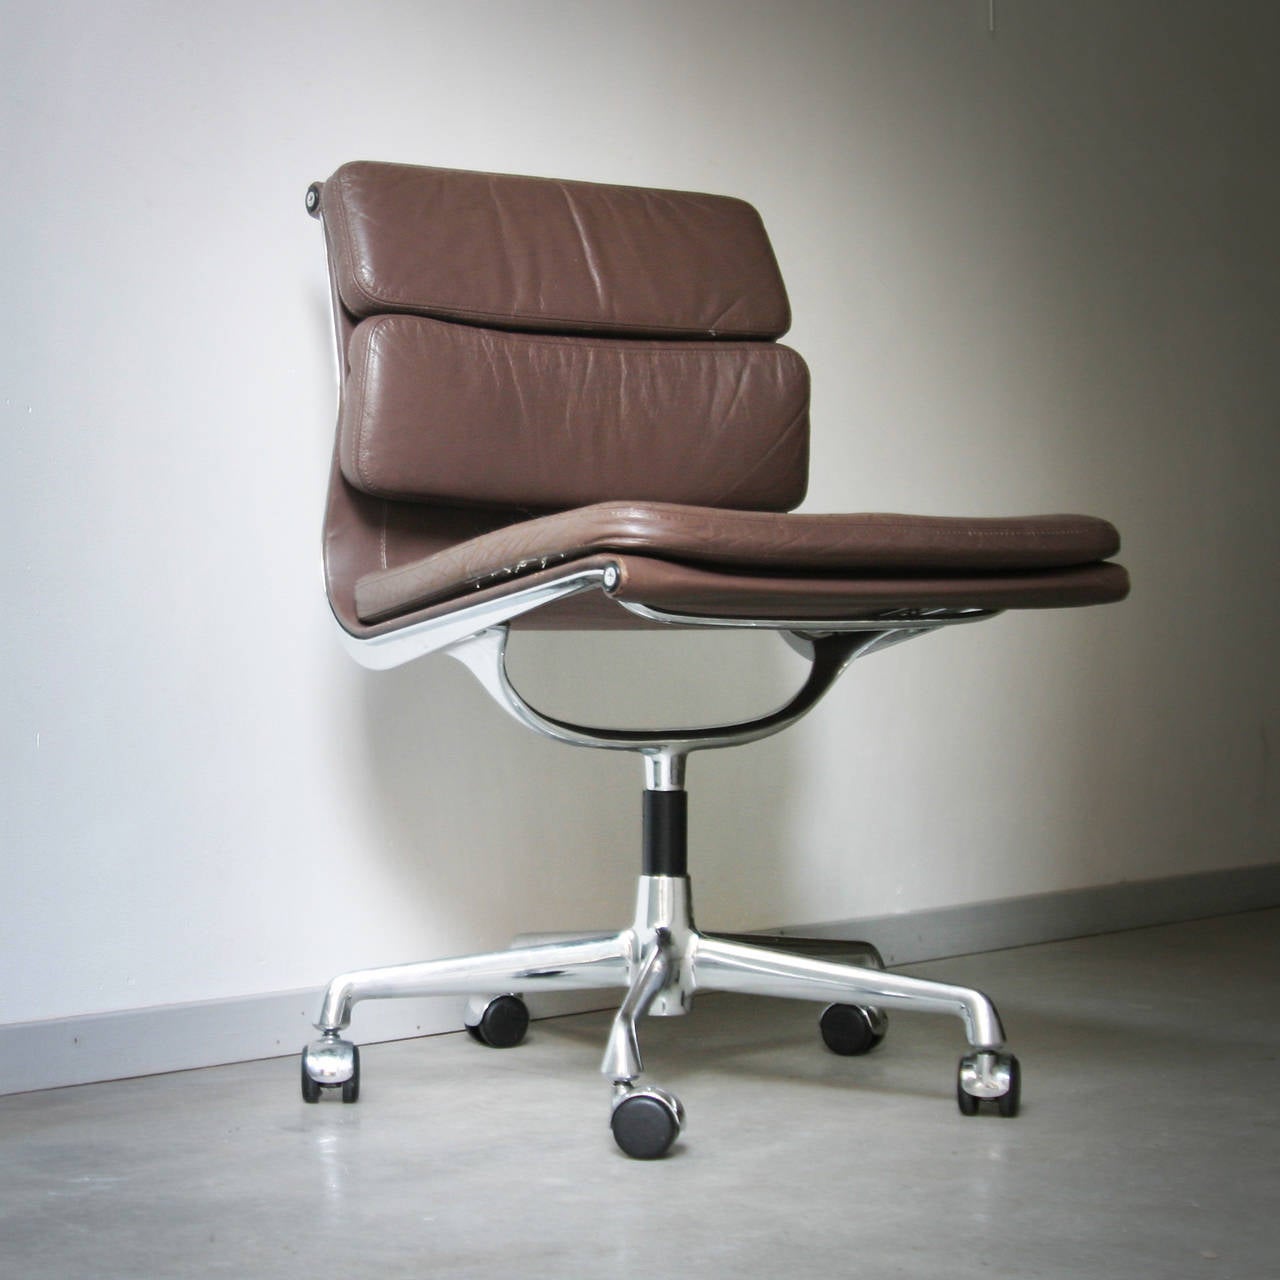 Pair of Eames EA 205 chairs. They are part of the Aluminum Soft Pad Group designed in 1969 by Charles and Ray Eames for Vitra. Brown leather, original no armrests. Can not turn but stand on castors. Beautiful patina, very good condition.